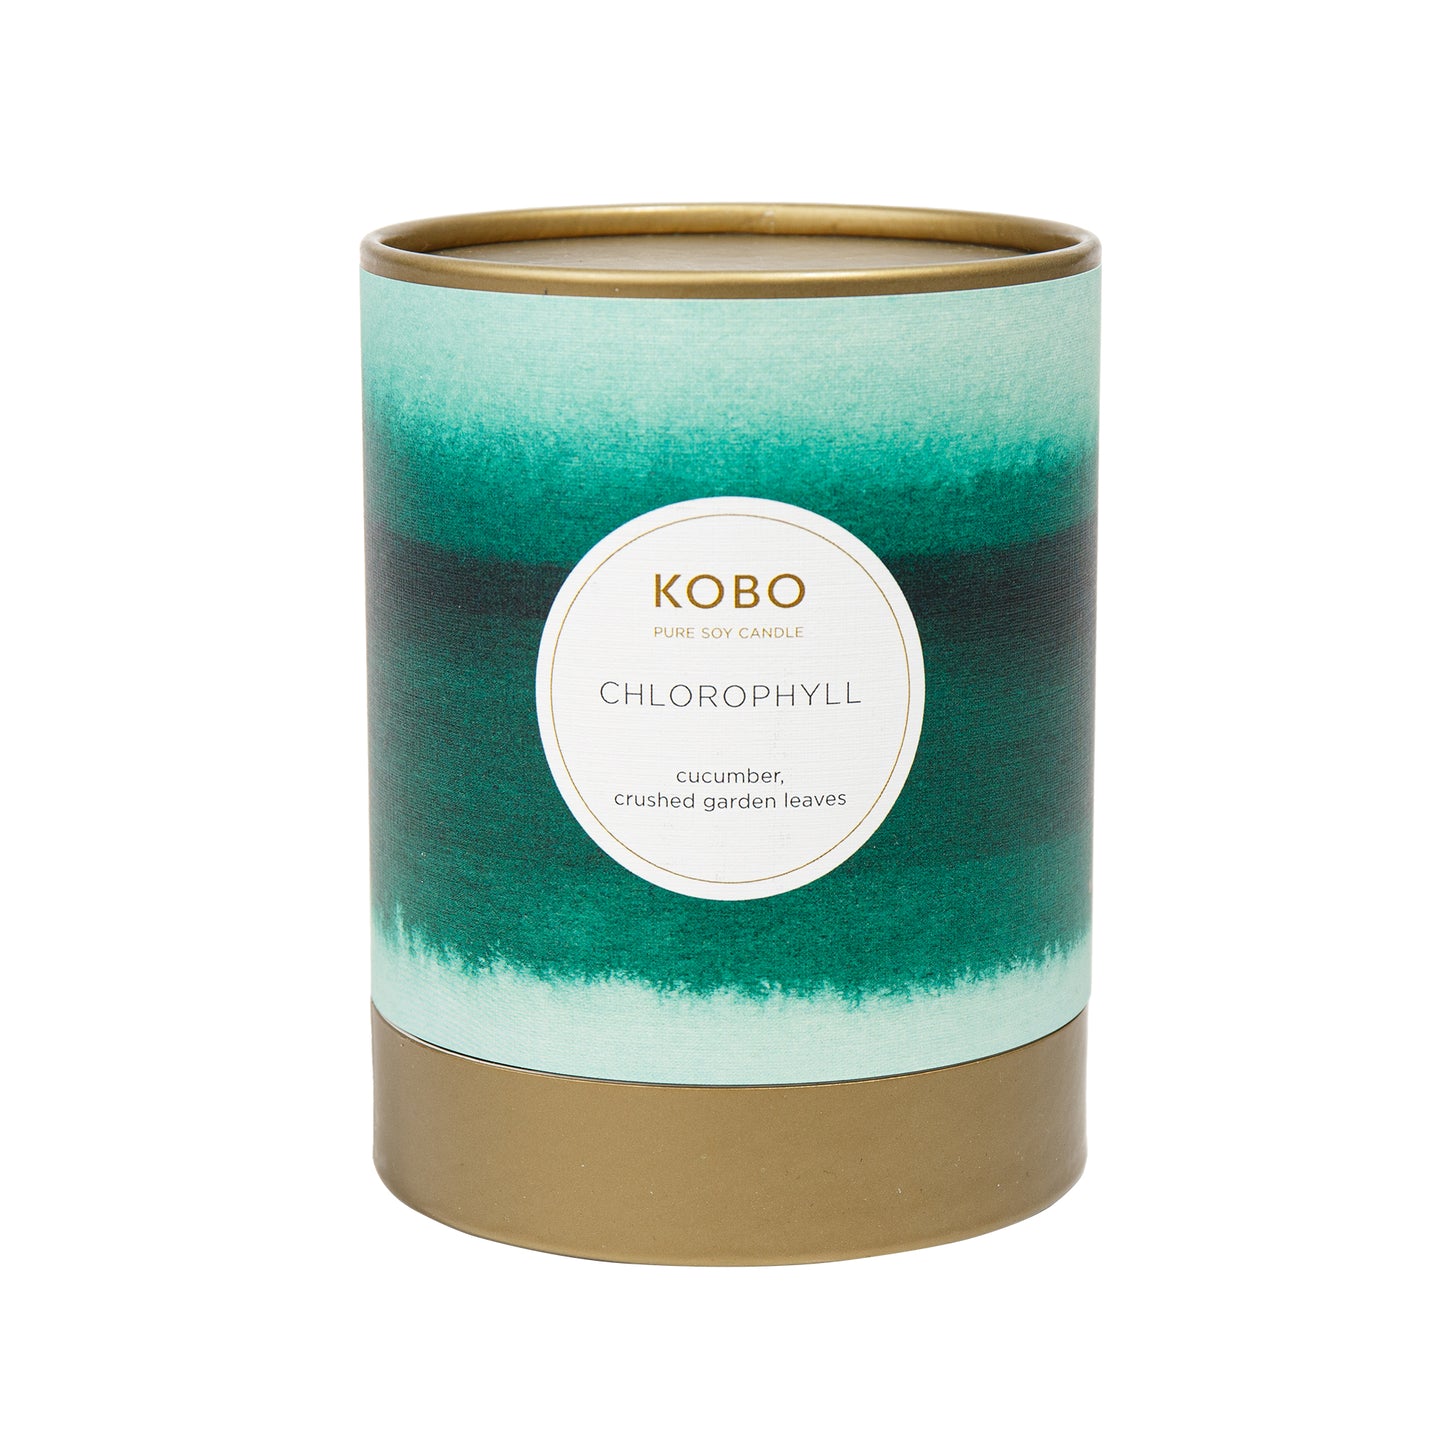 Primary Image of Water Color Chlorophyll Candle